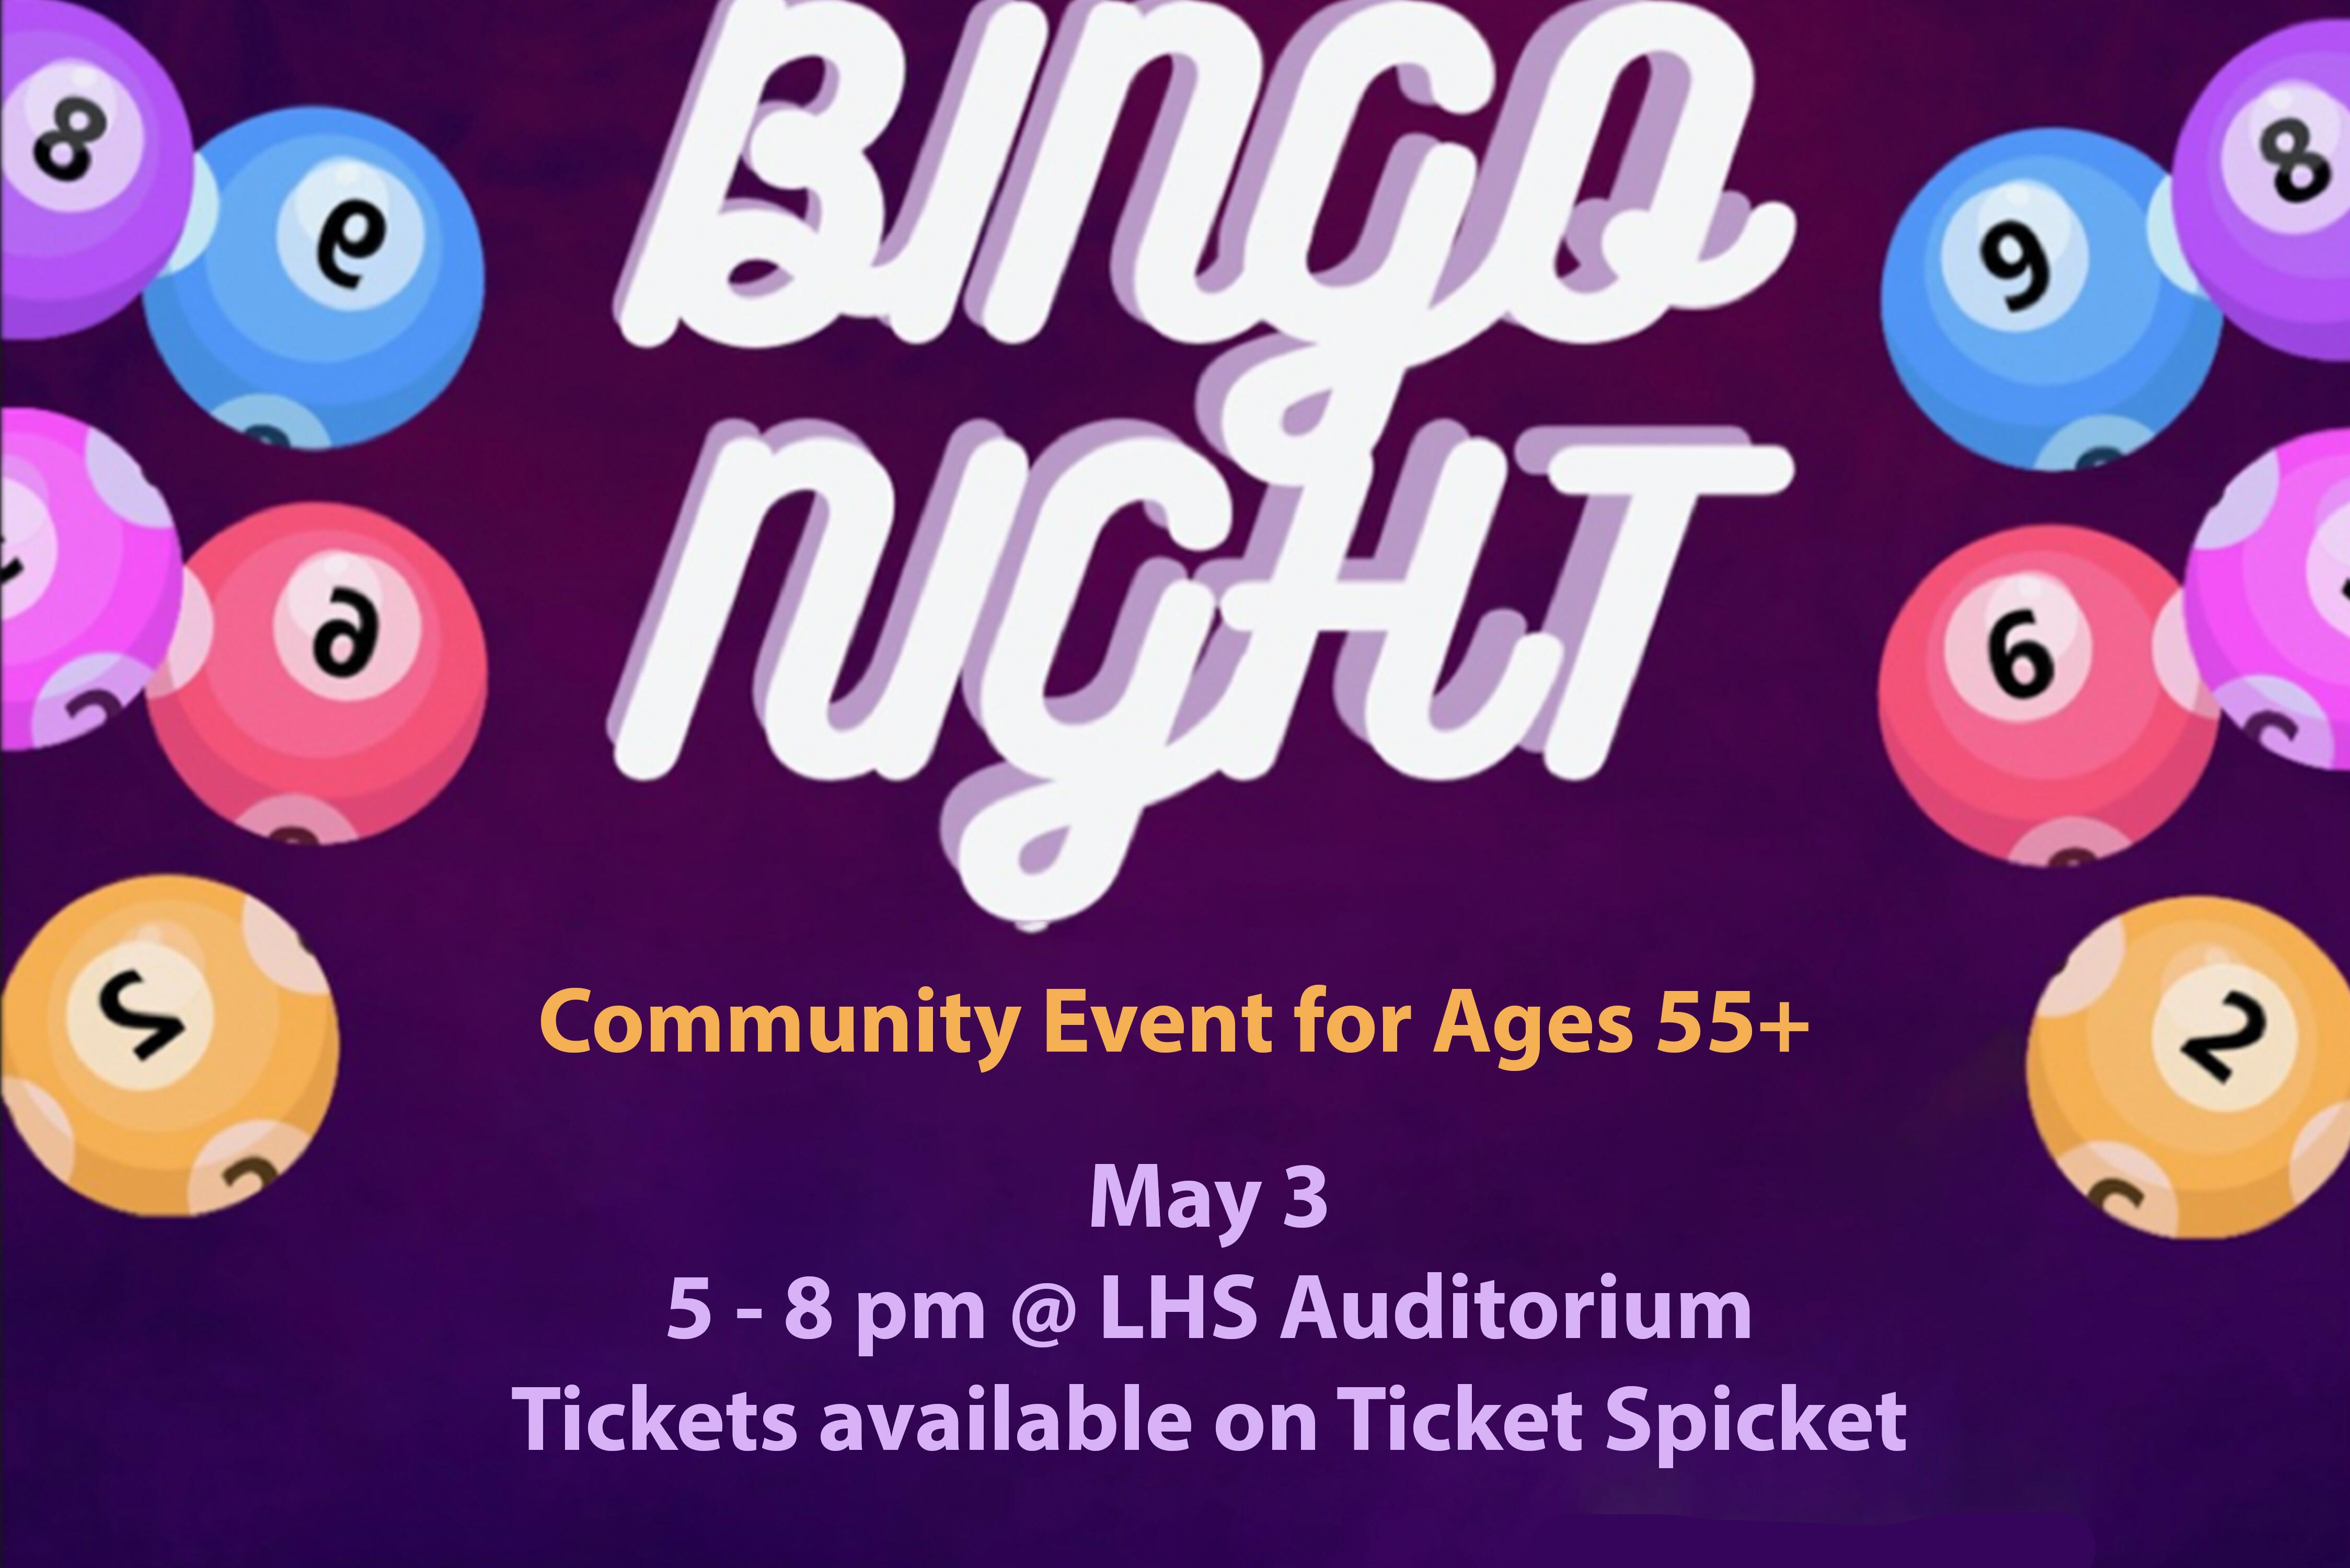 Bingo Night ages 55 and up, May 3 from 5 to 8 pm, tickets available on ticket spicket